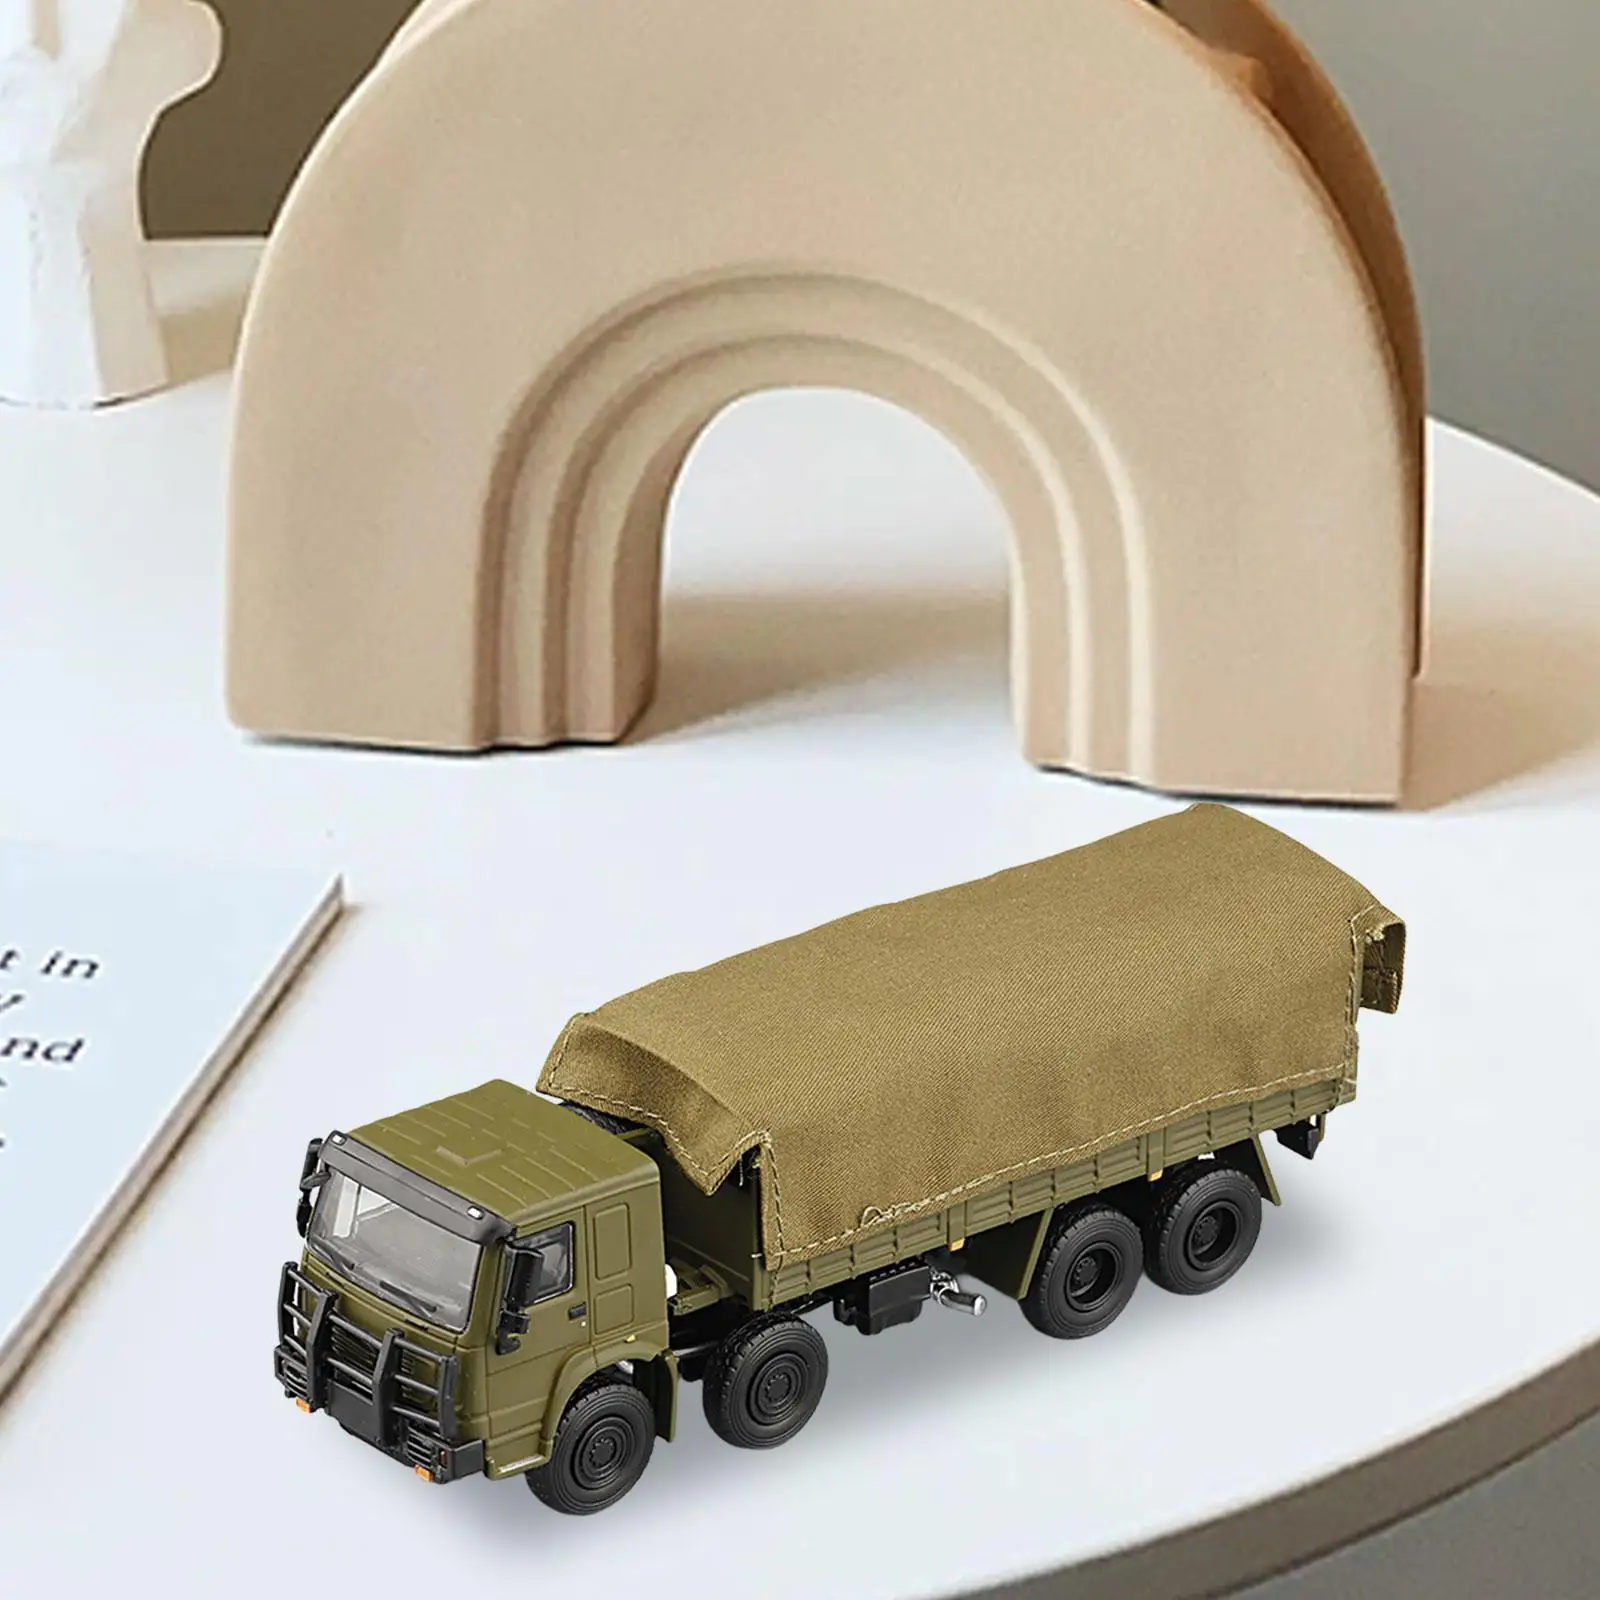 1:64 Diorama Street Car Model Mini Vehicles Toys Alloy Car Model Collection for Diorama Micro Landscapes Photography Props Decor